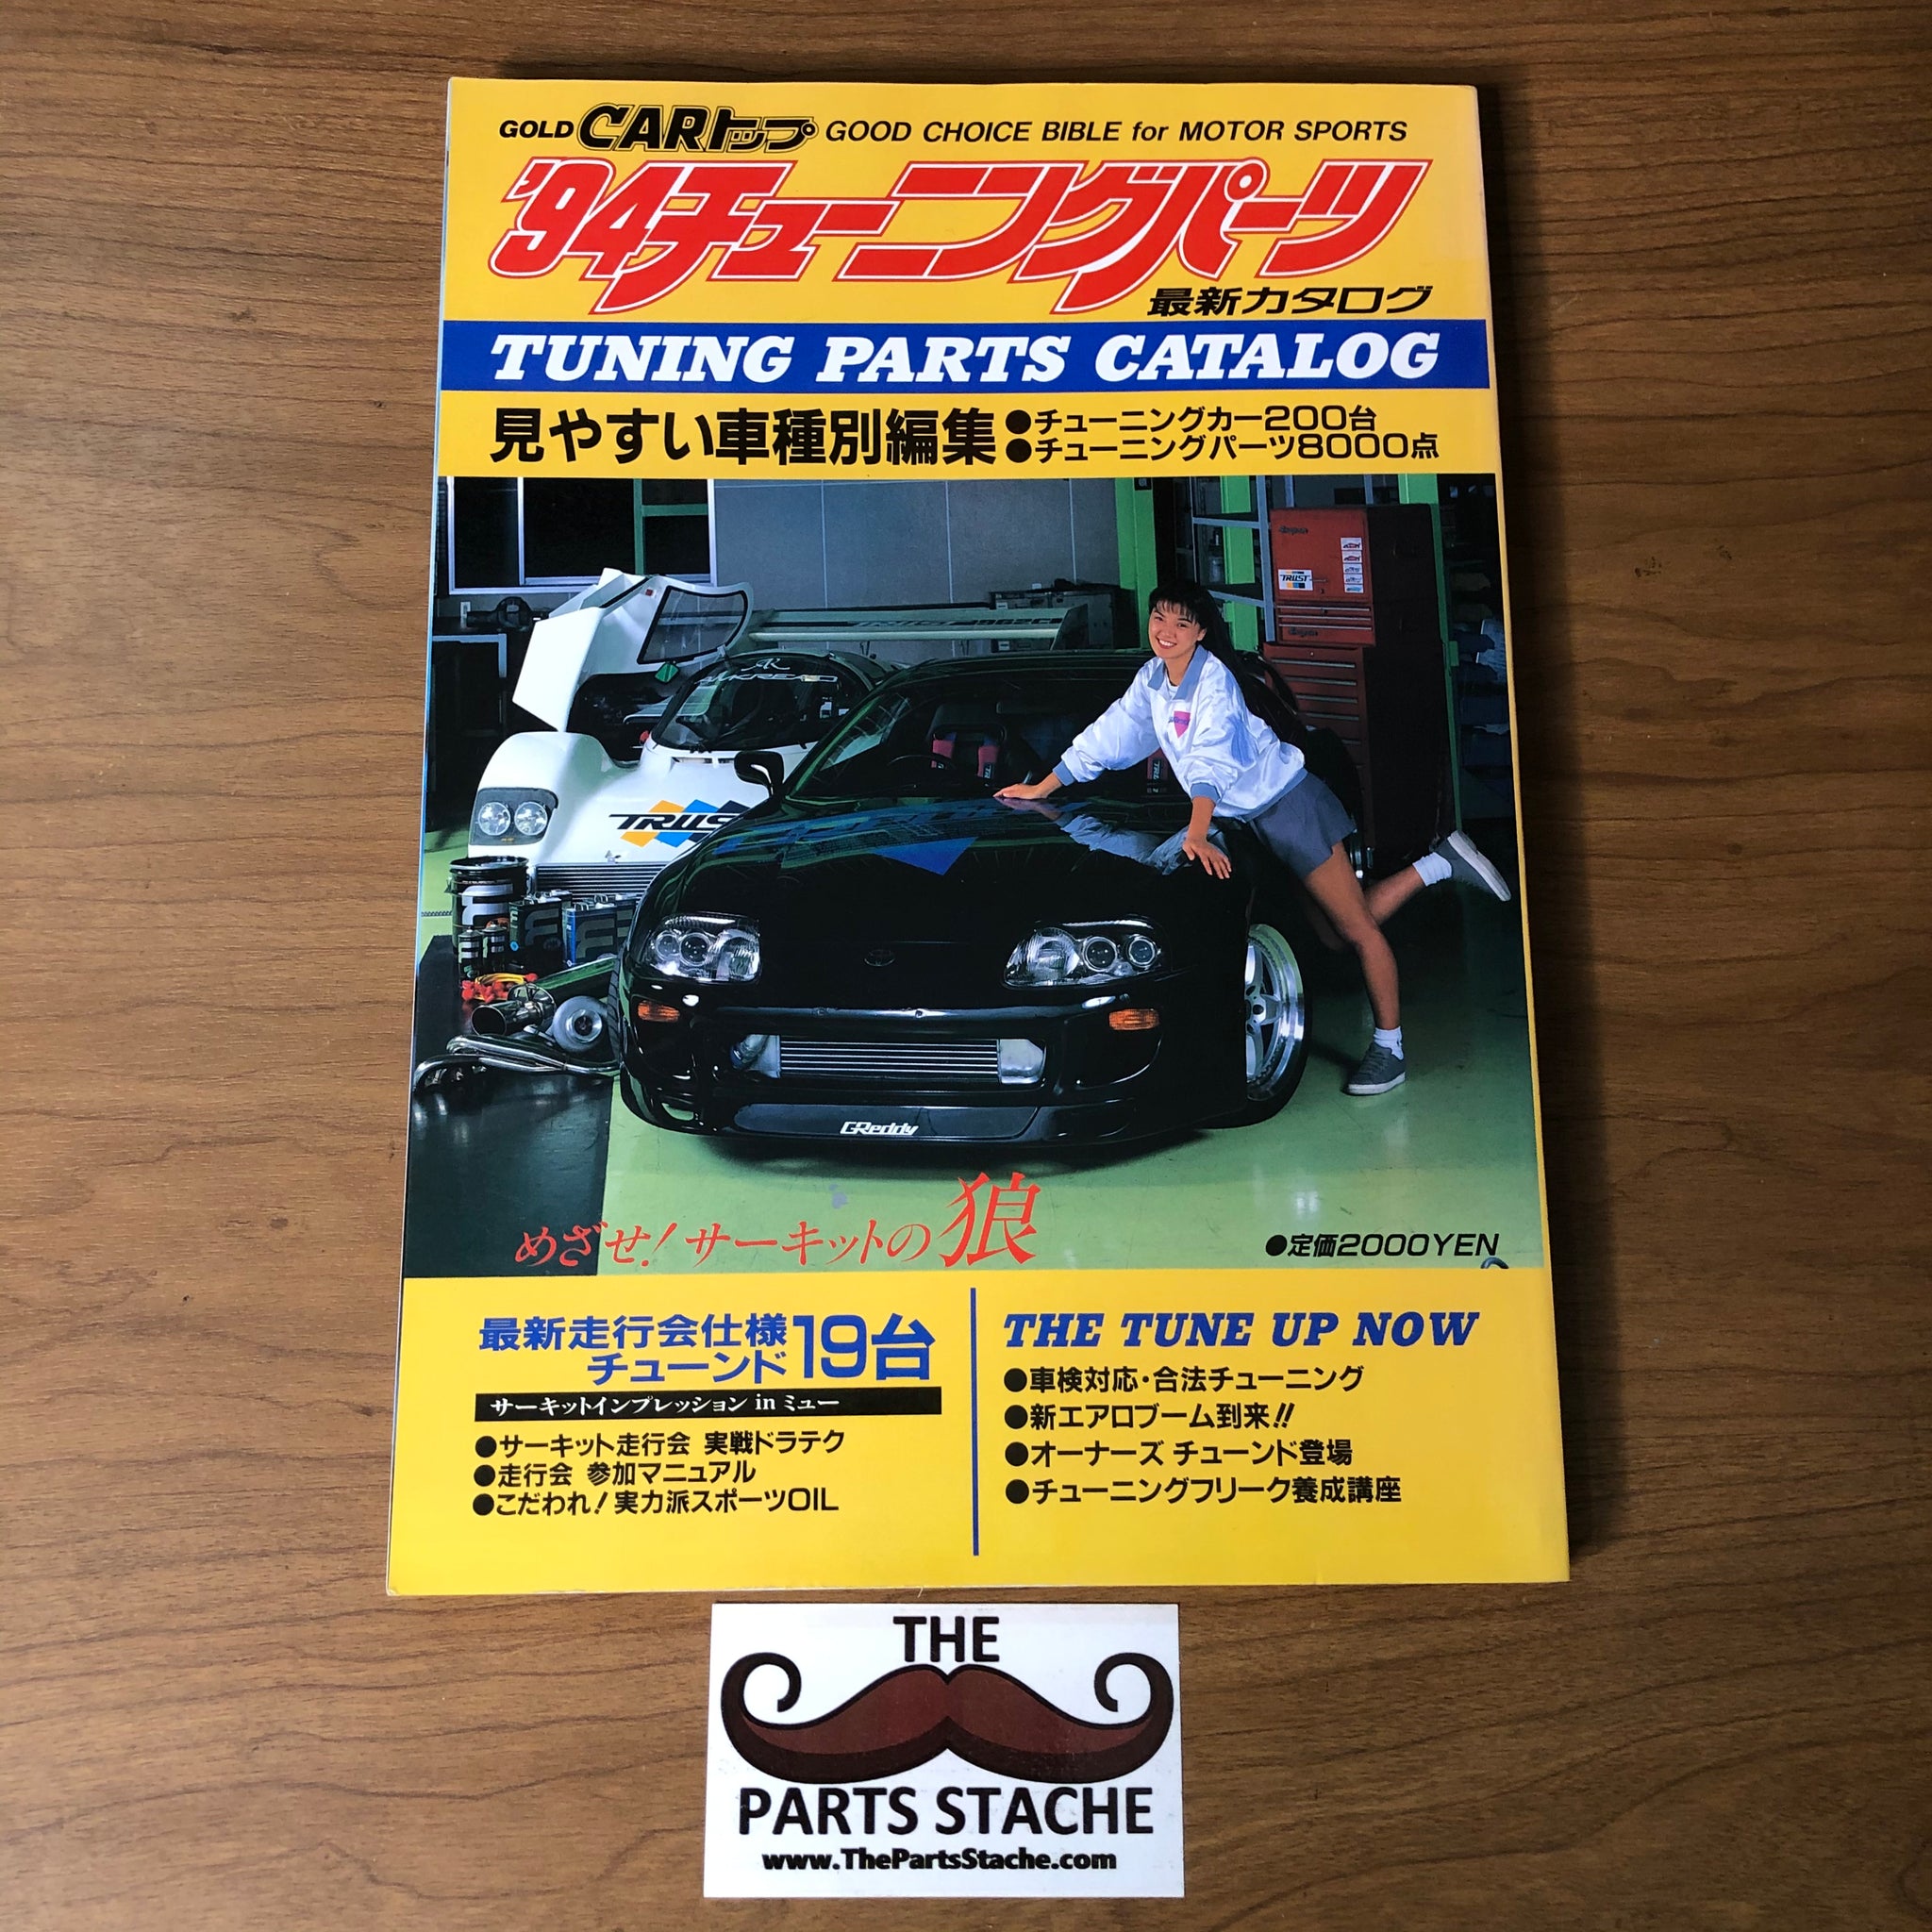 GoldCar Tuning Parts Catalog 1994 – The Parts Stache